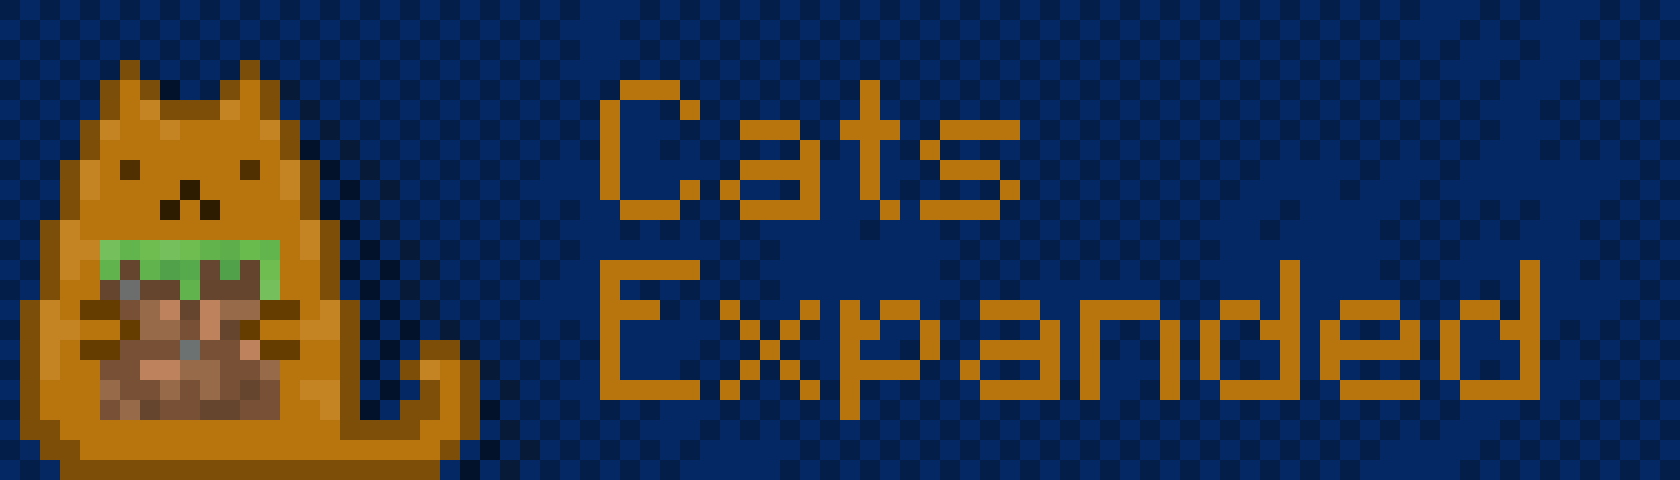 Cats Expanded Banner